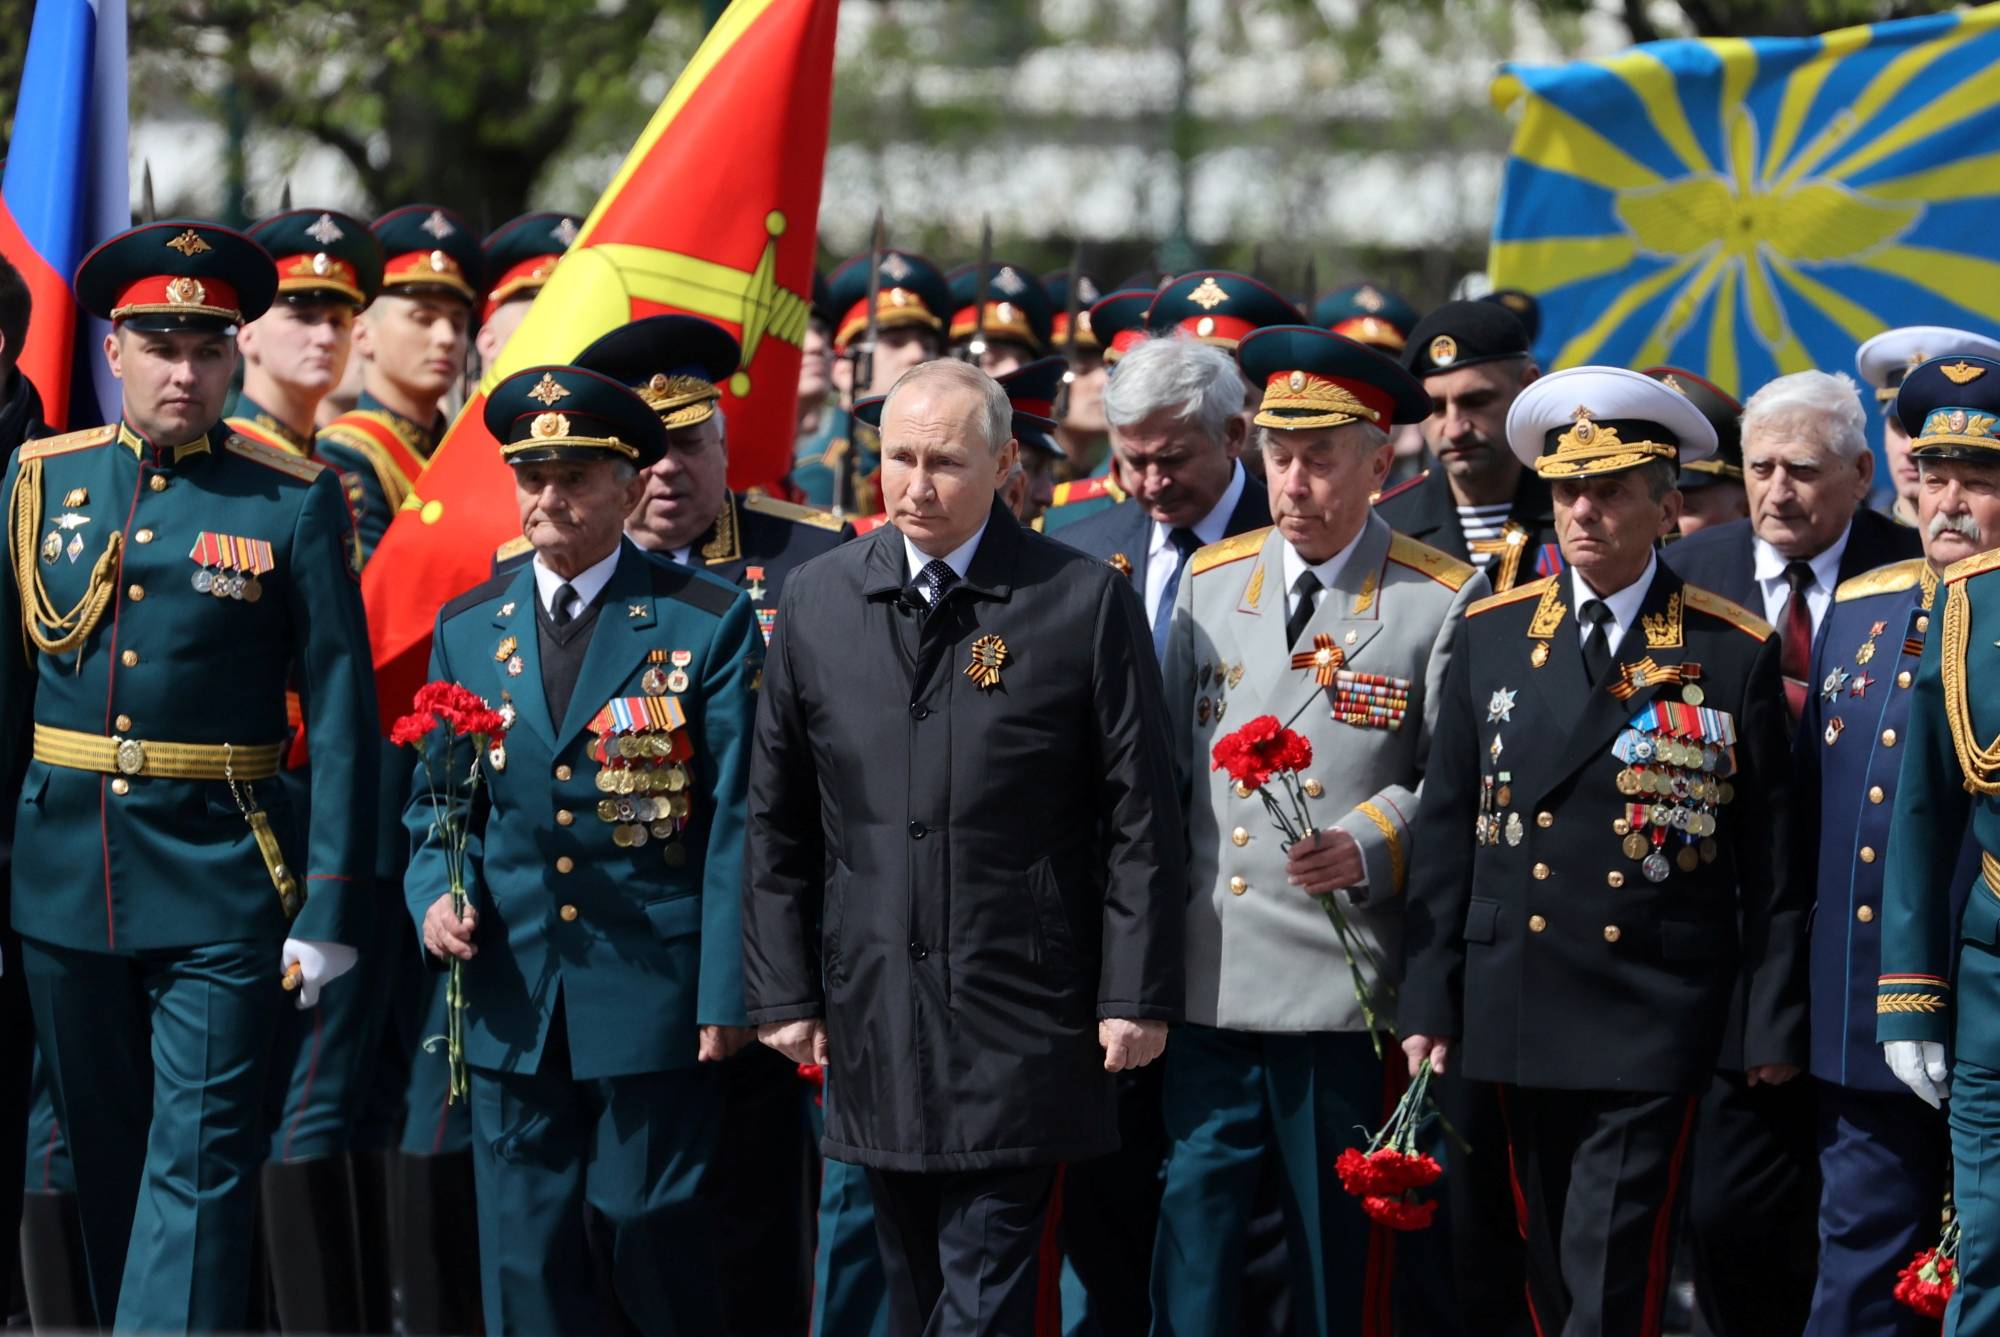 Russian President Vladimir Putin attends a wreath-laying ceremony on Victory Day in Moscow on May 9, the anniversary of the victory over Nazi Germany in World War II. | SPUTNIK / POOL / VIA REUTERS